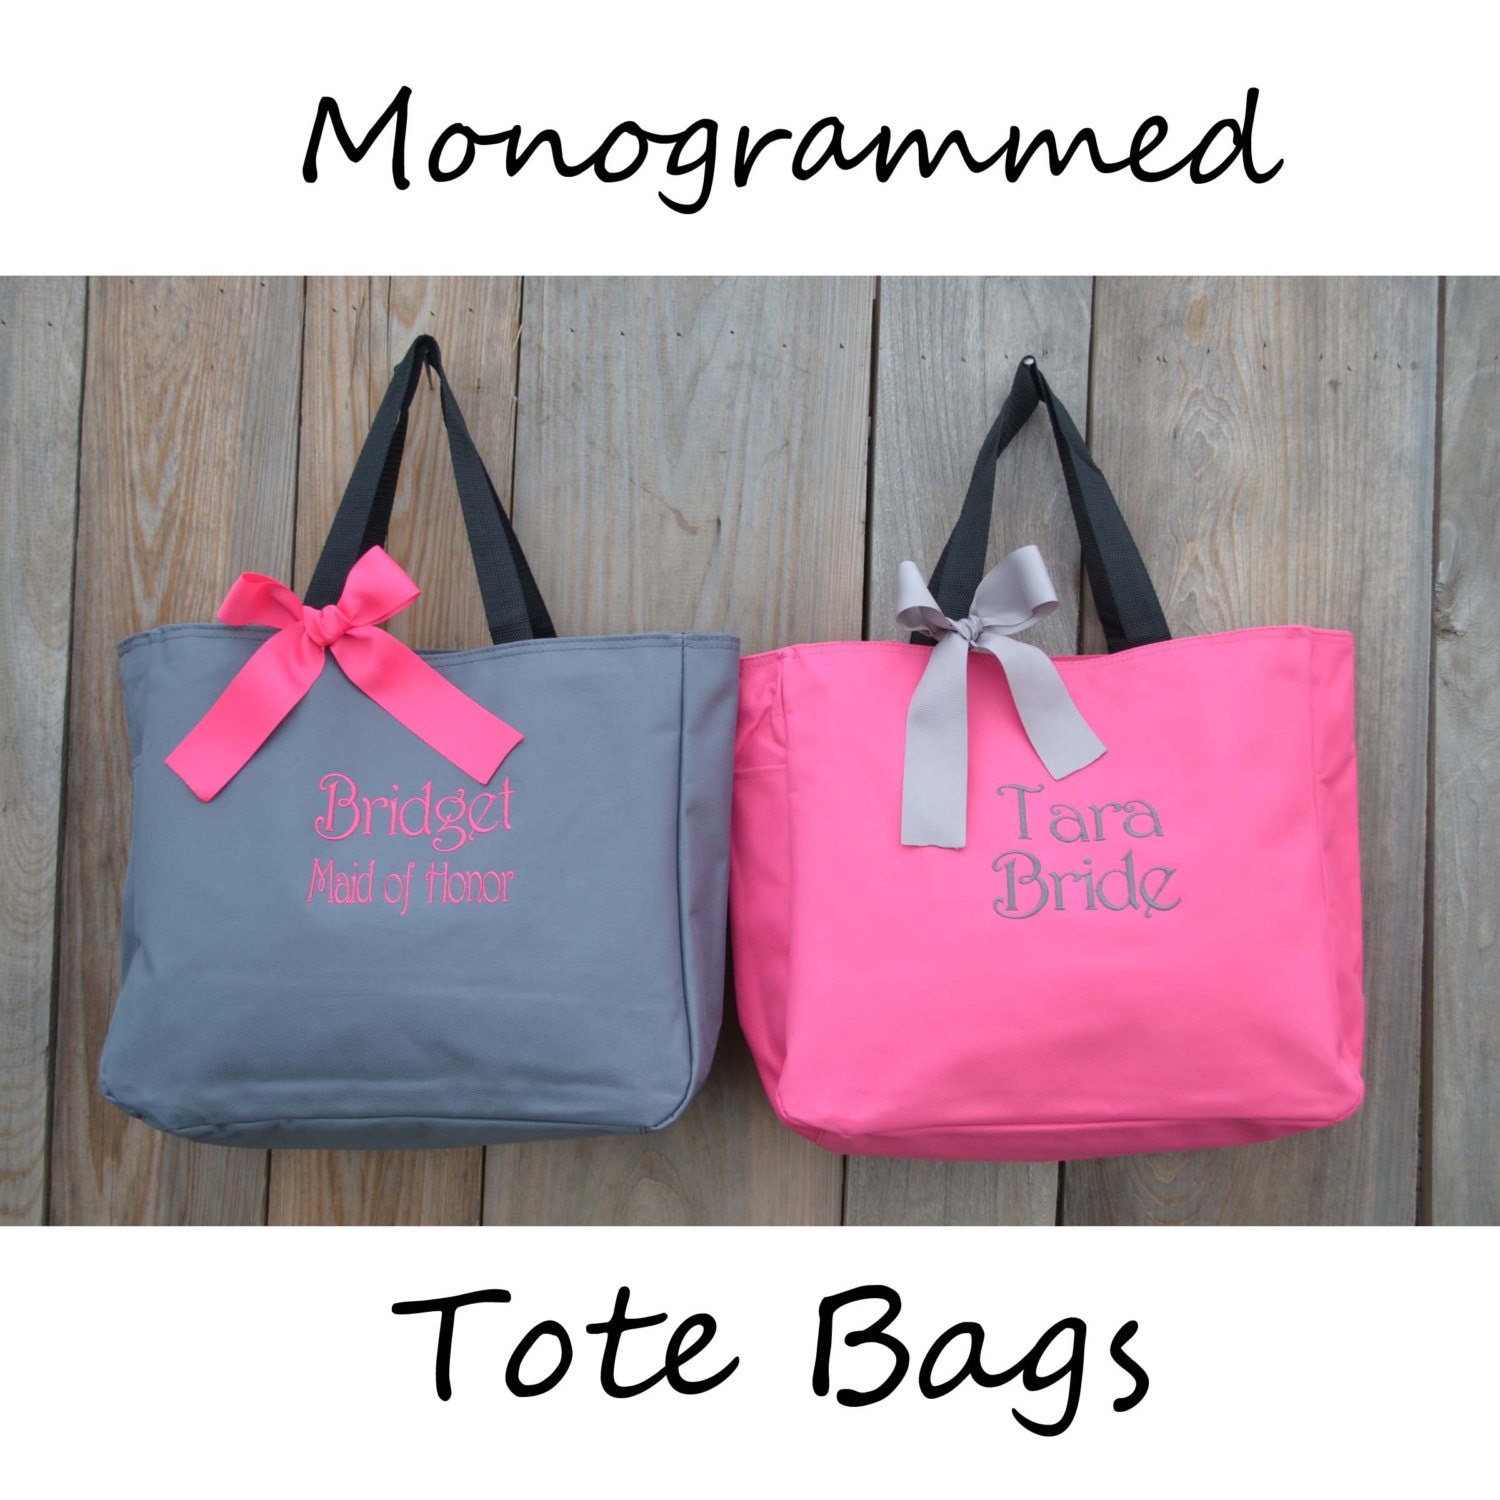 5 Personalized Bridesmaid Gift Tote Bags by PersonalizedGiftsbyJ